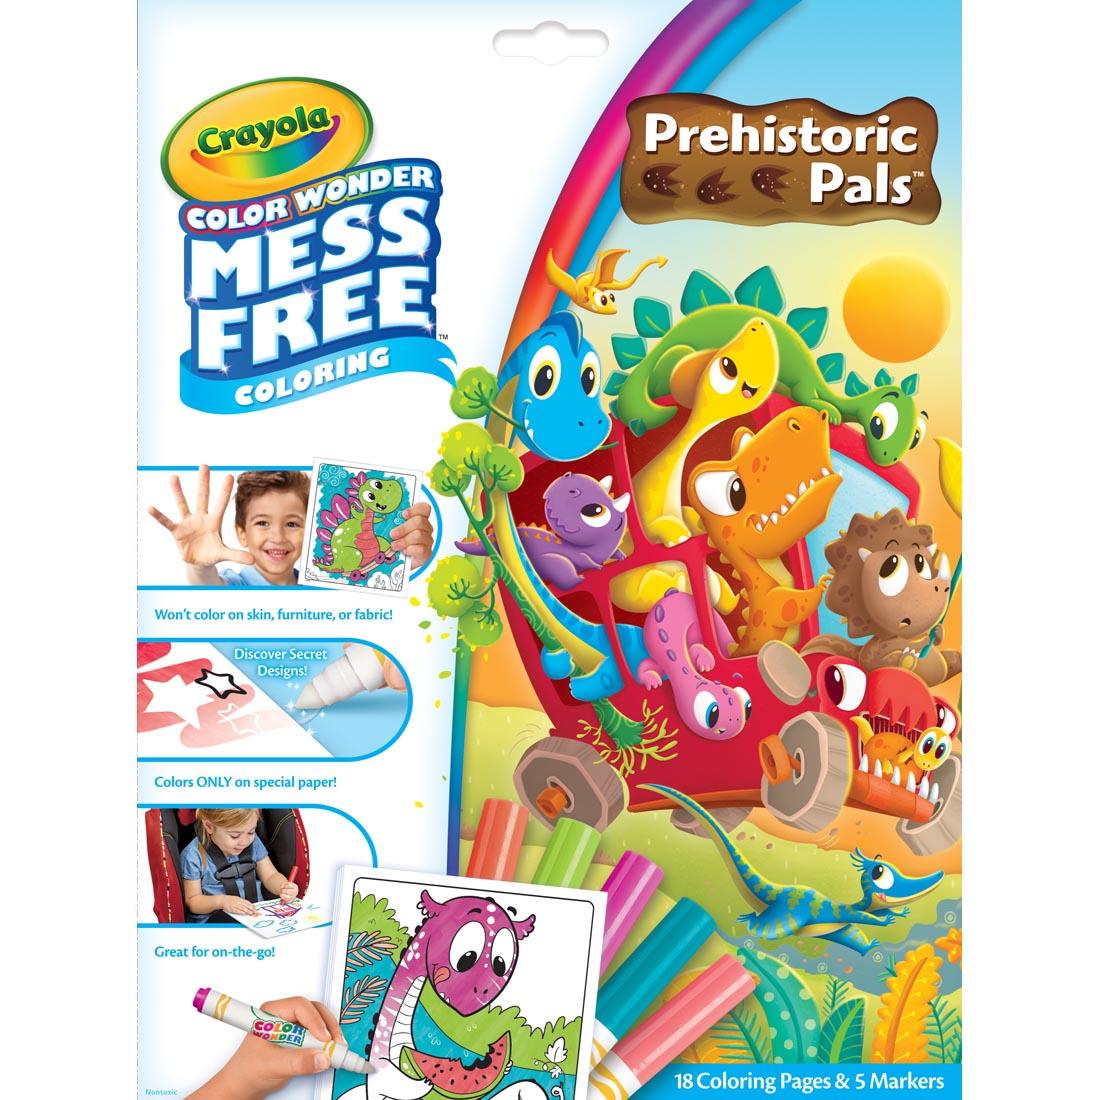 Package of Crayola Color Wonder Mess Free Prehistoric Pals Coloring Set